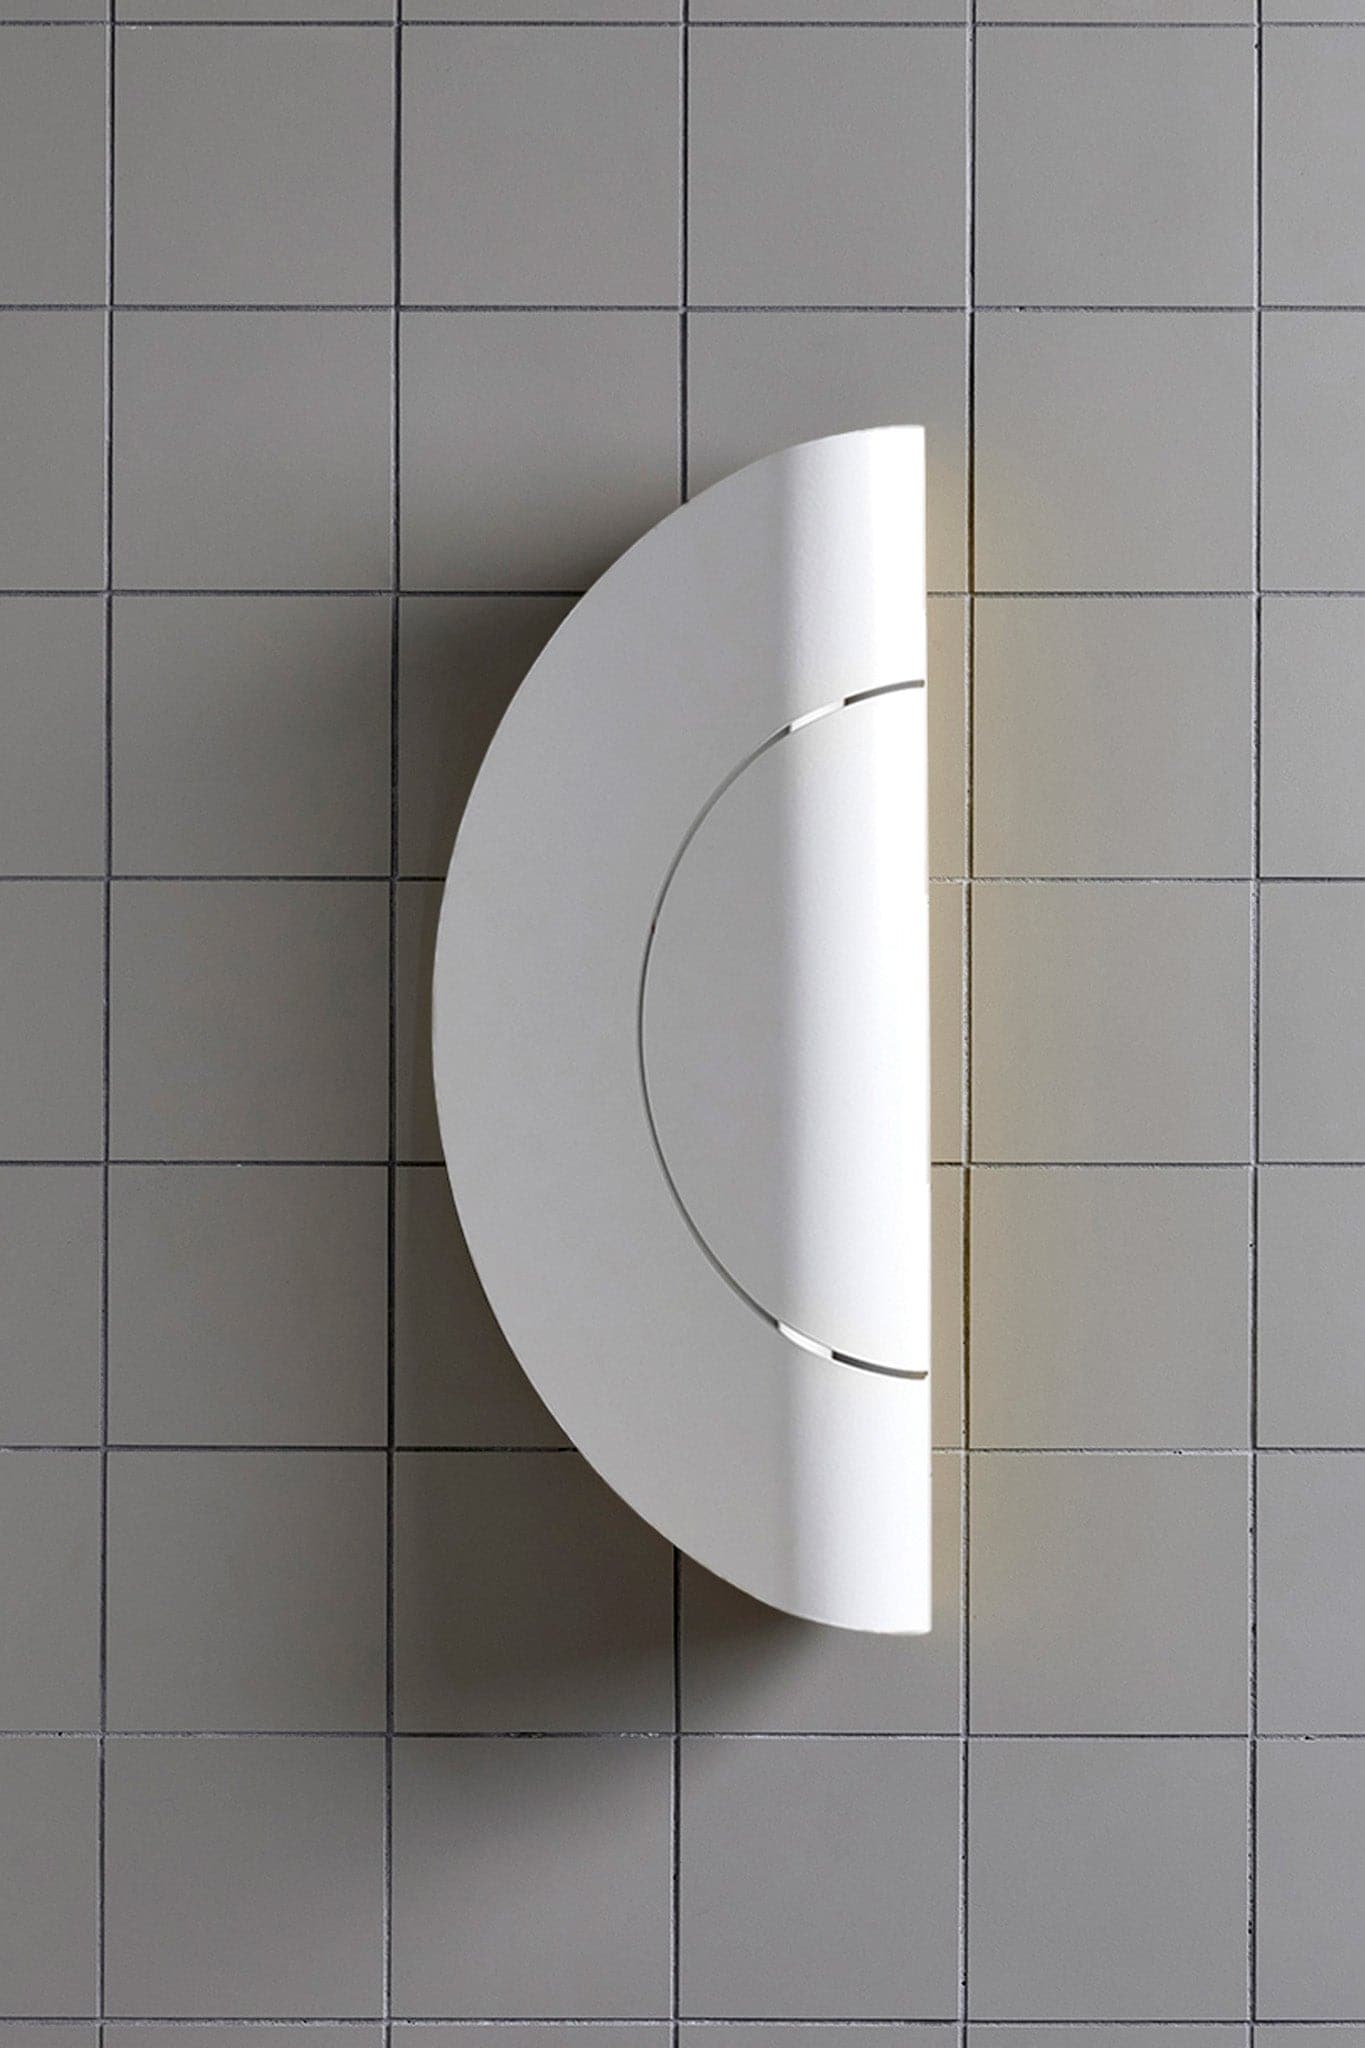 Marz Designs Feature Lighting - Furl Circle Wall Light in White Powder Coat